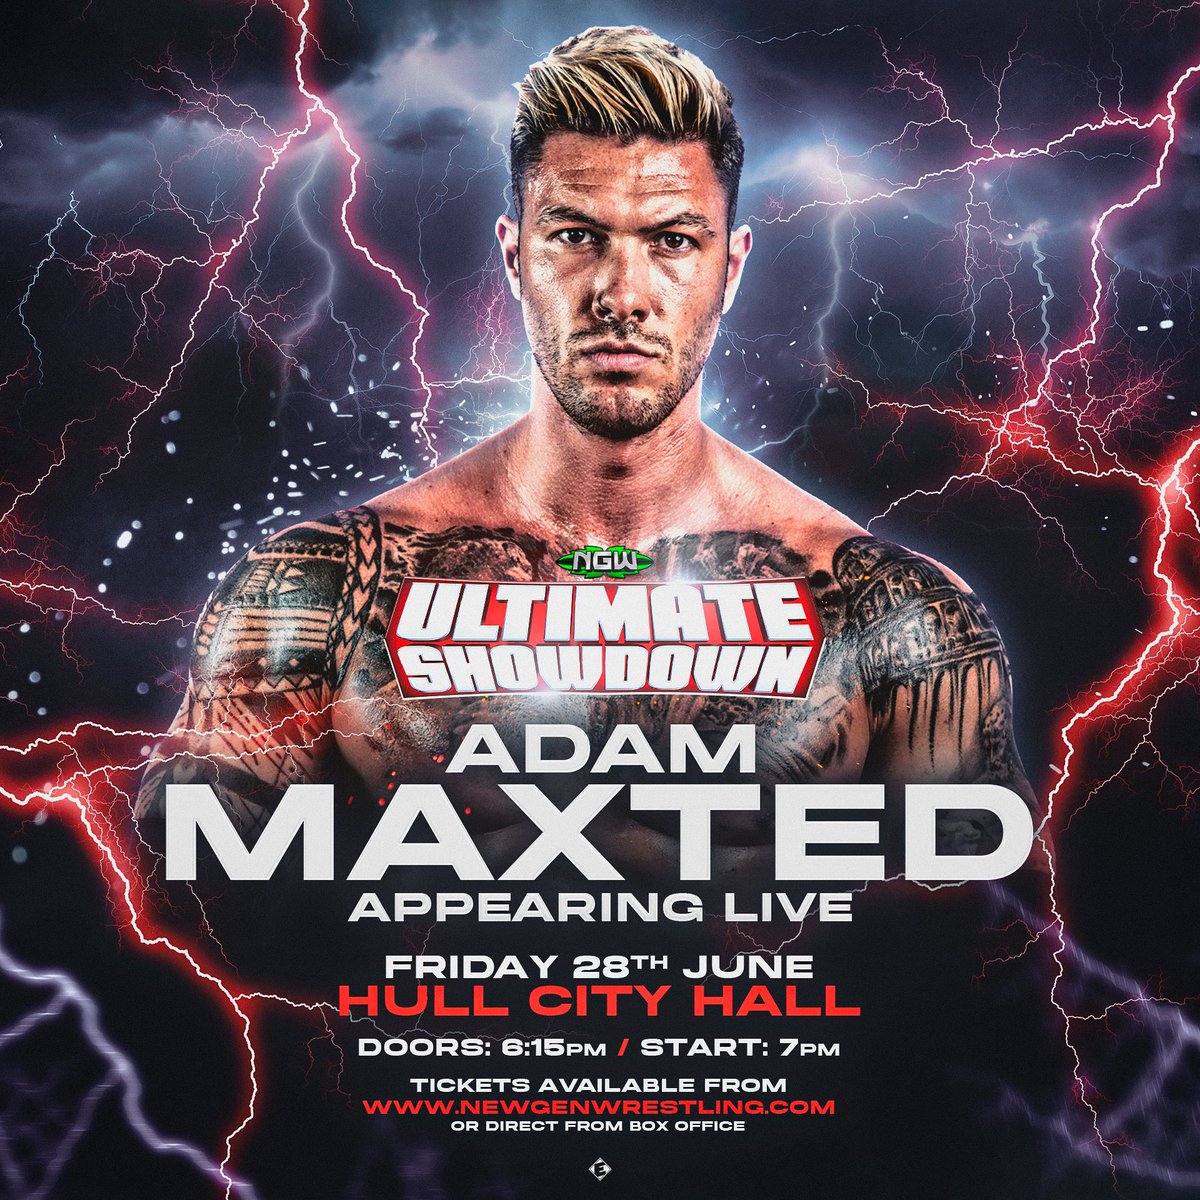 As a former NGW Champion, recent Love Island star, Adam Maxted was never beaten for his championship. He intends to put that right. Will he get his chance on Friday 28th June at Hull City Hall? Tickets: NewGenWrestling.com or direct from Hull City Hall Box Office